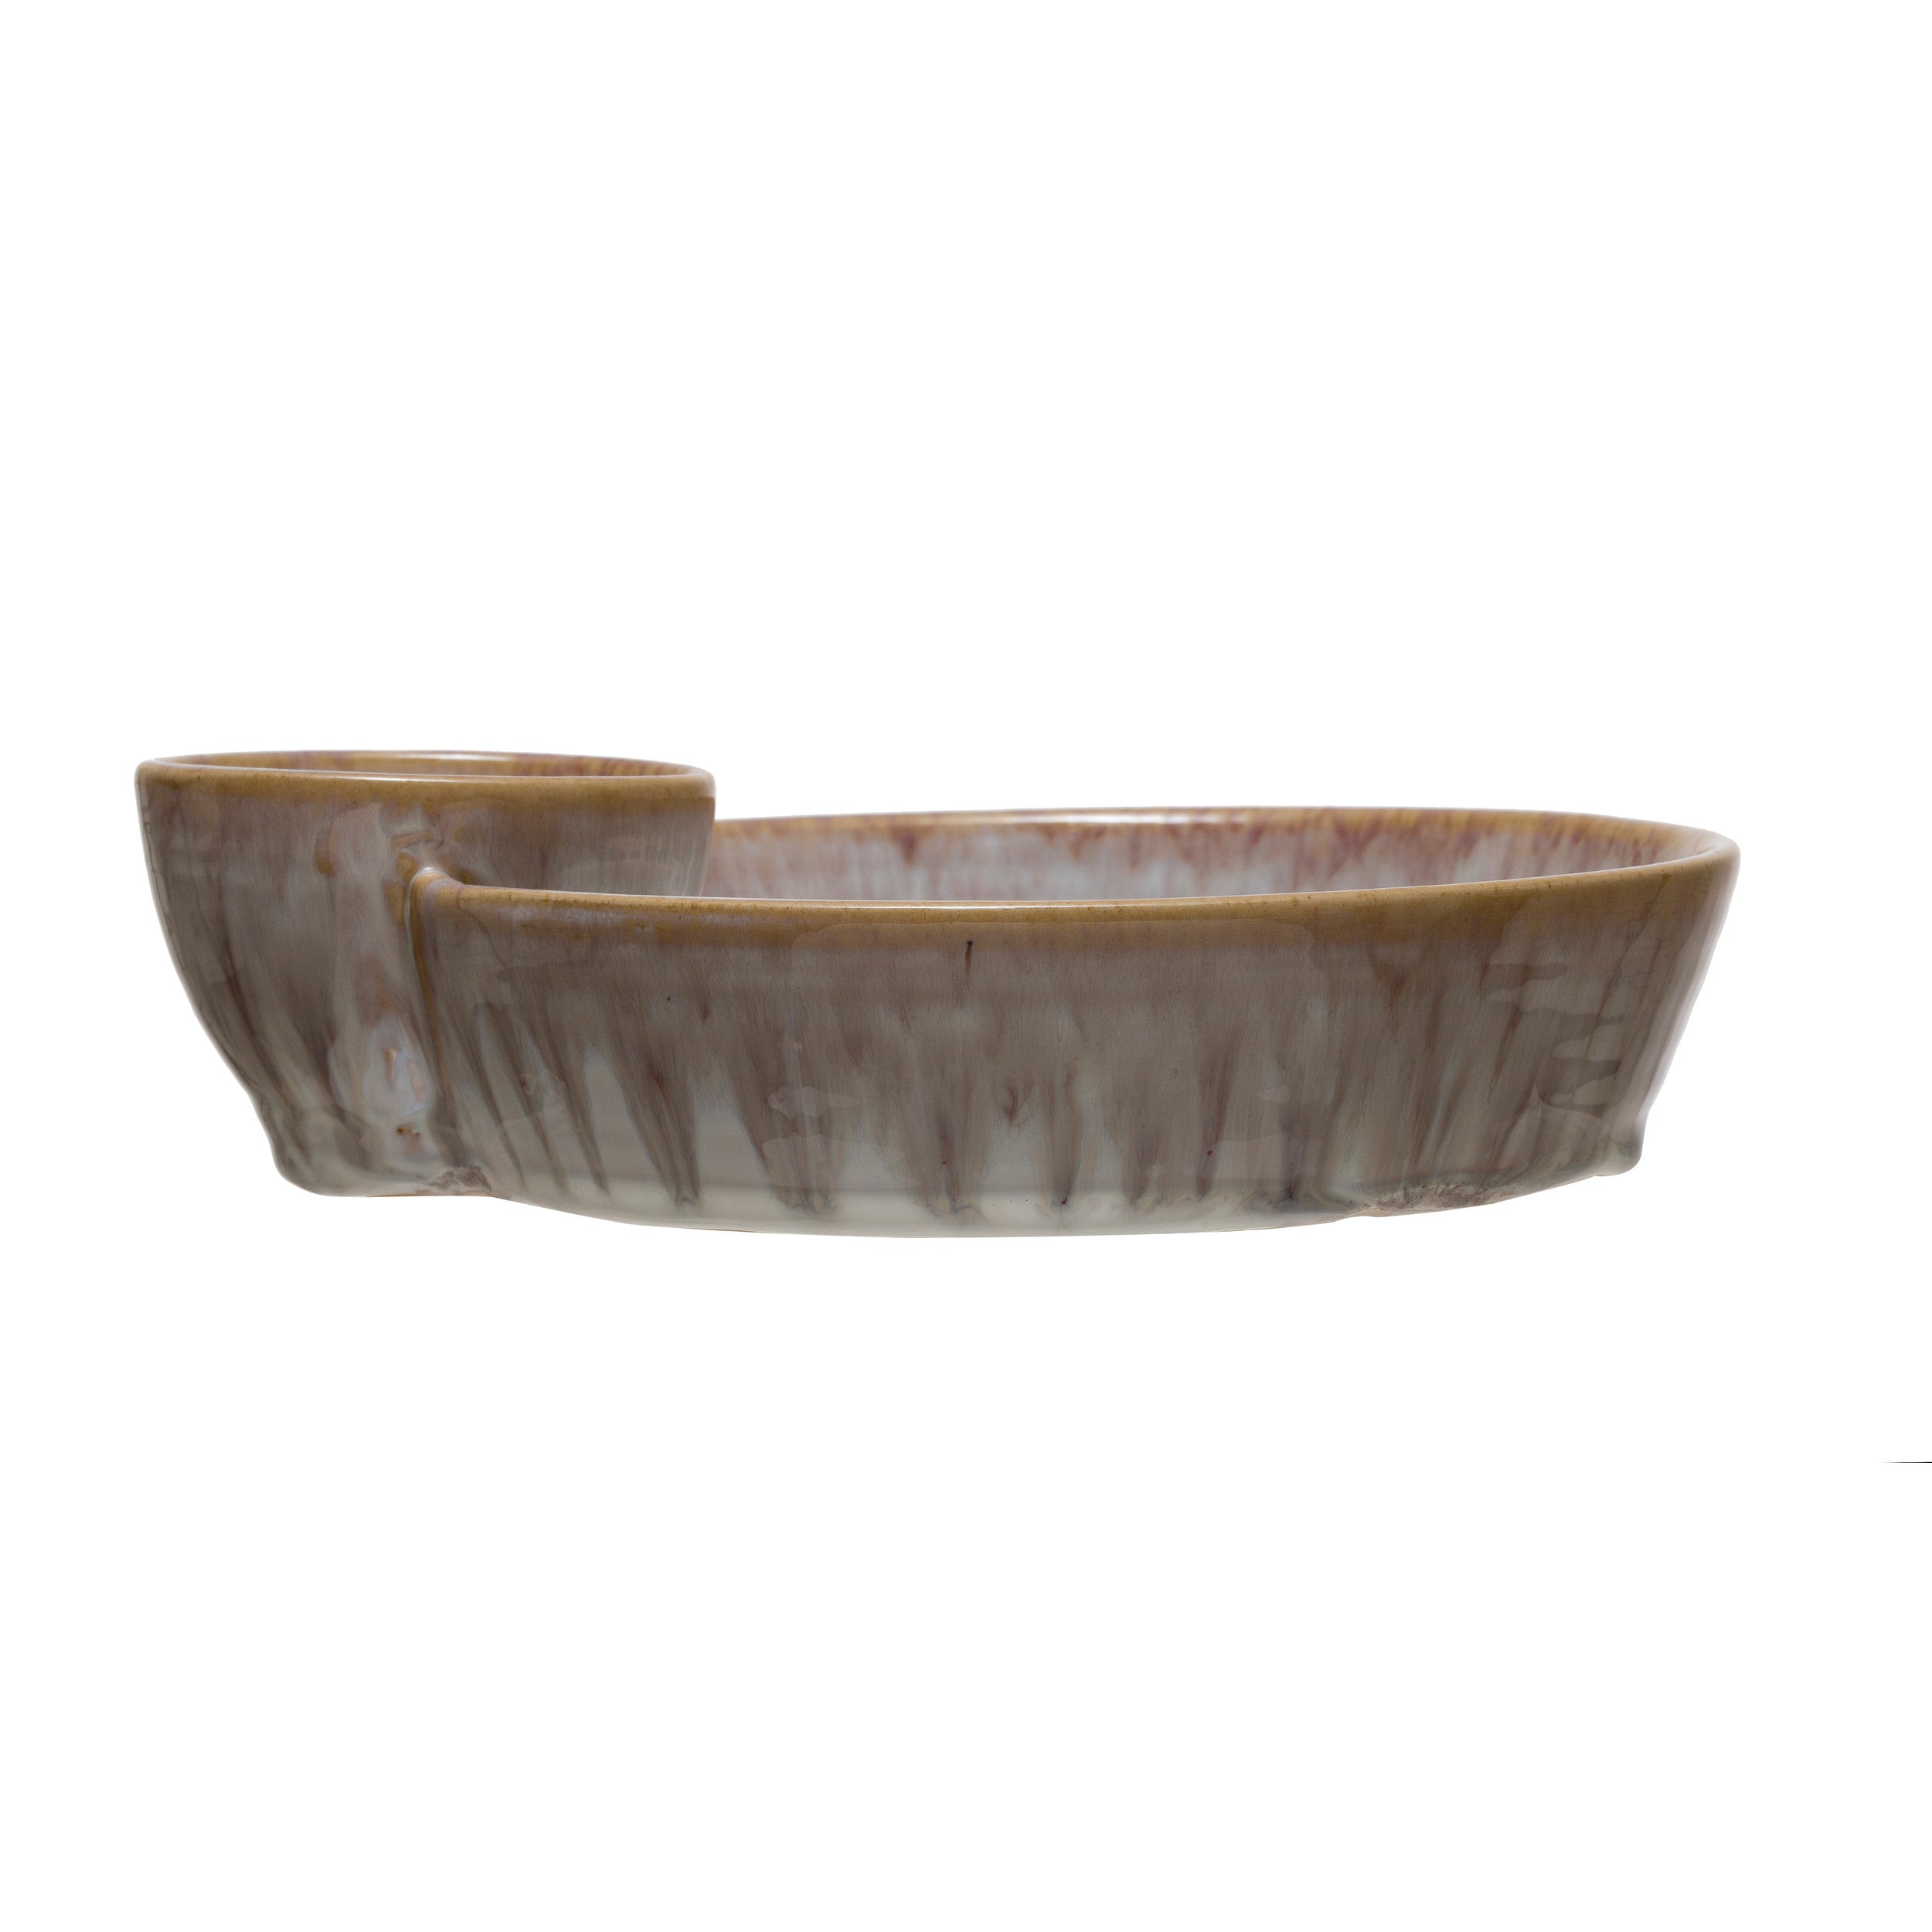 Stoneware Serving Dish with Sections